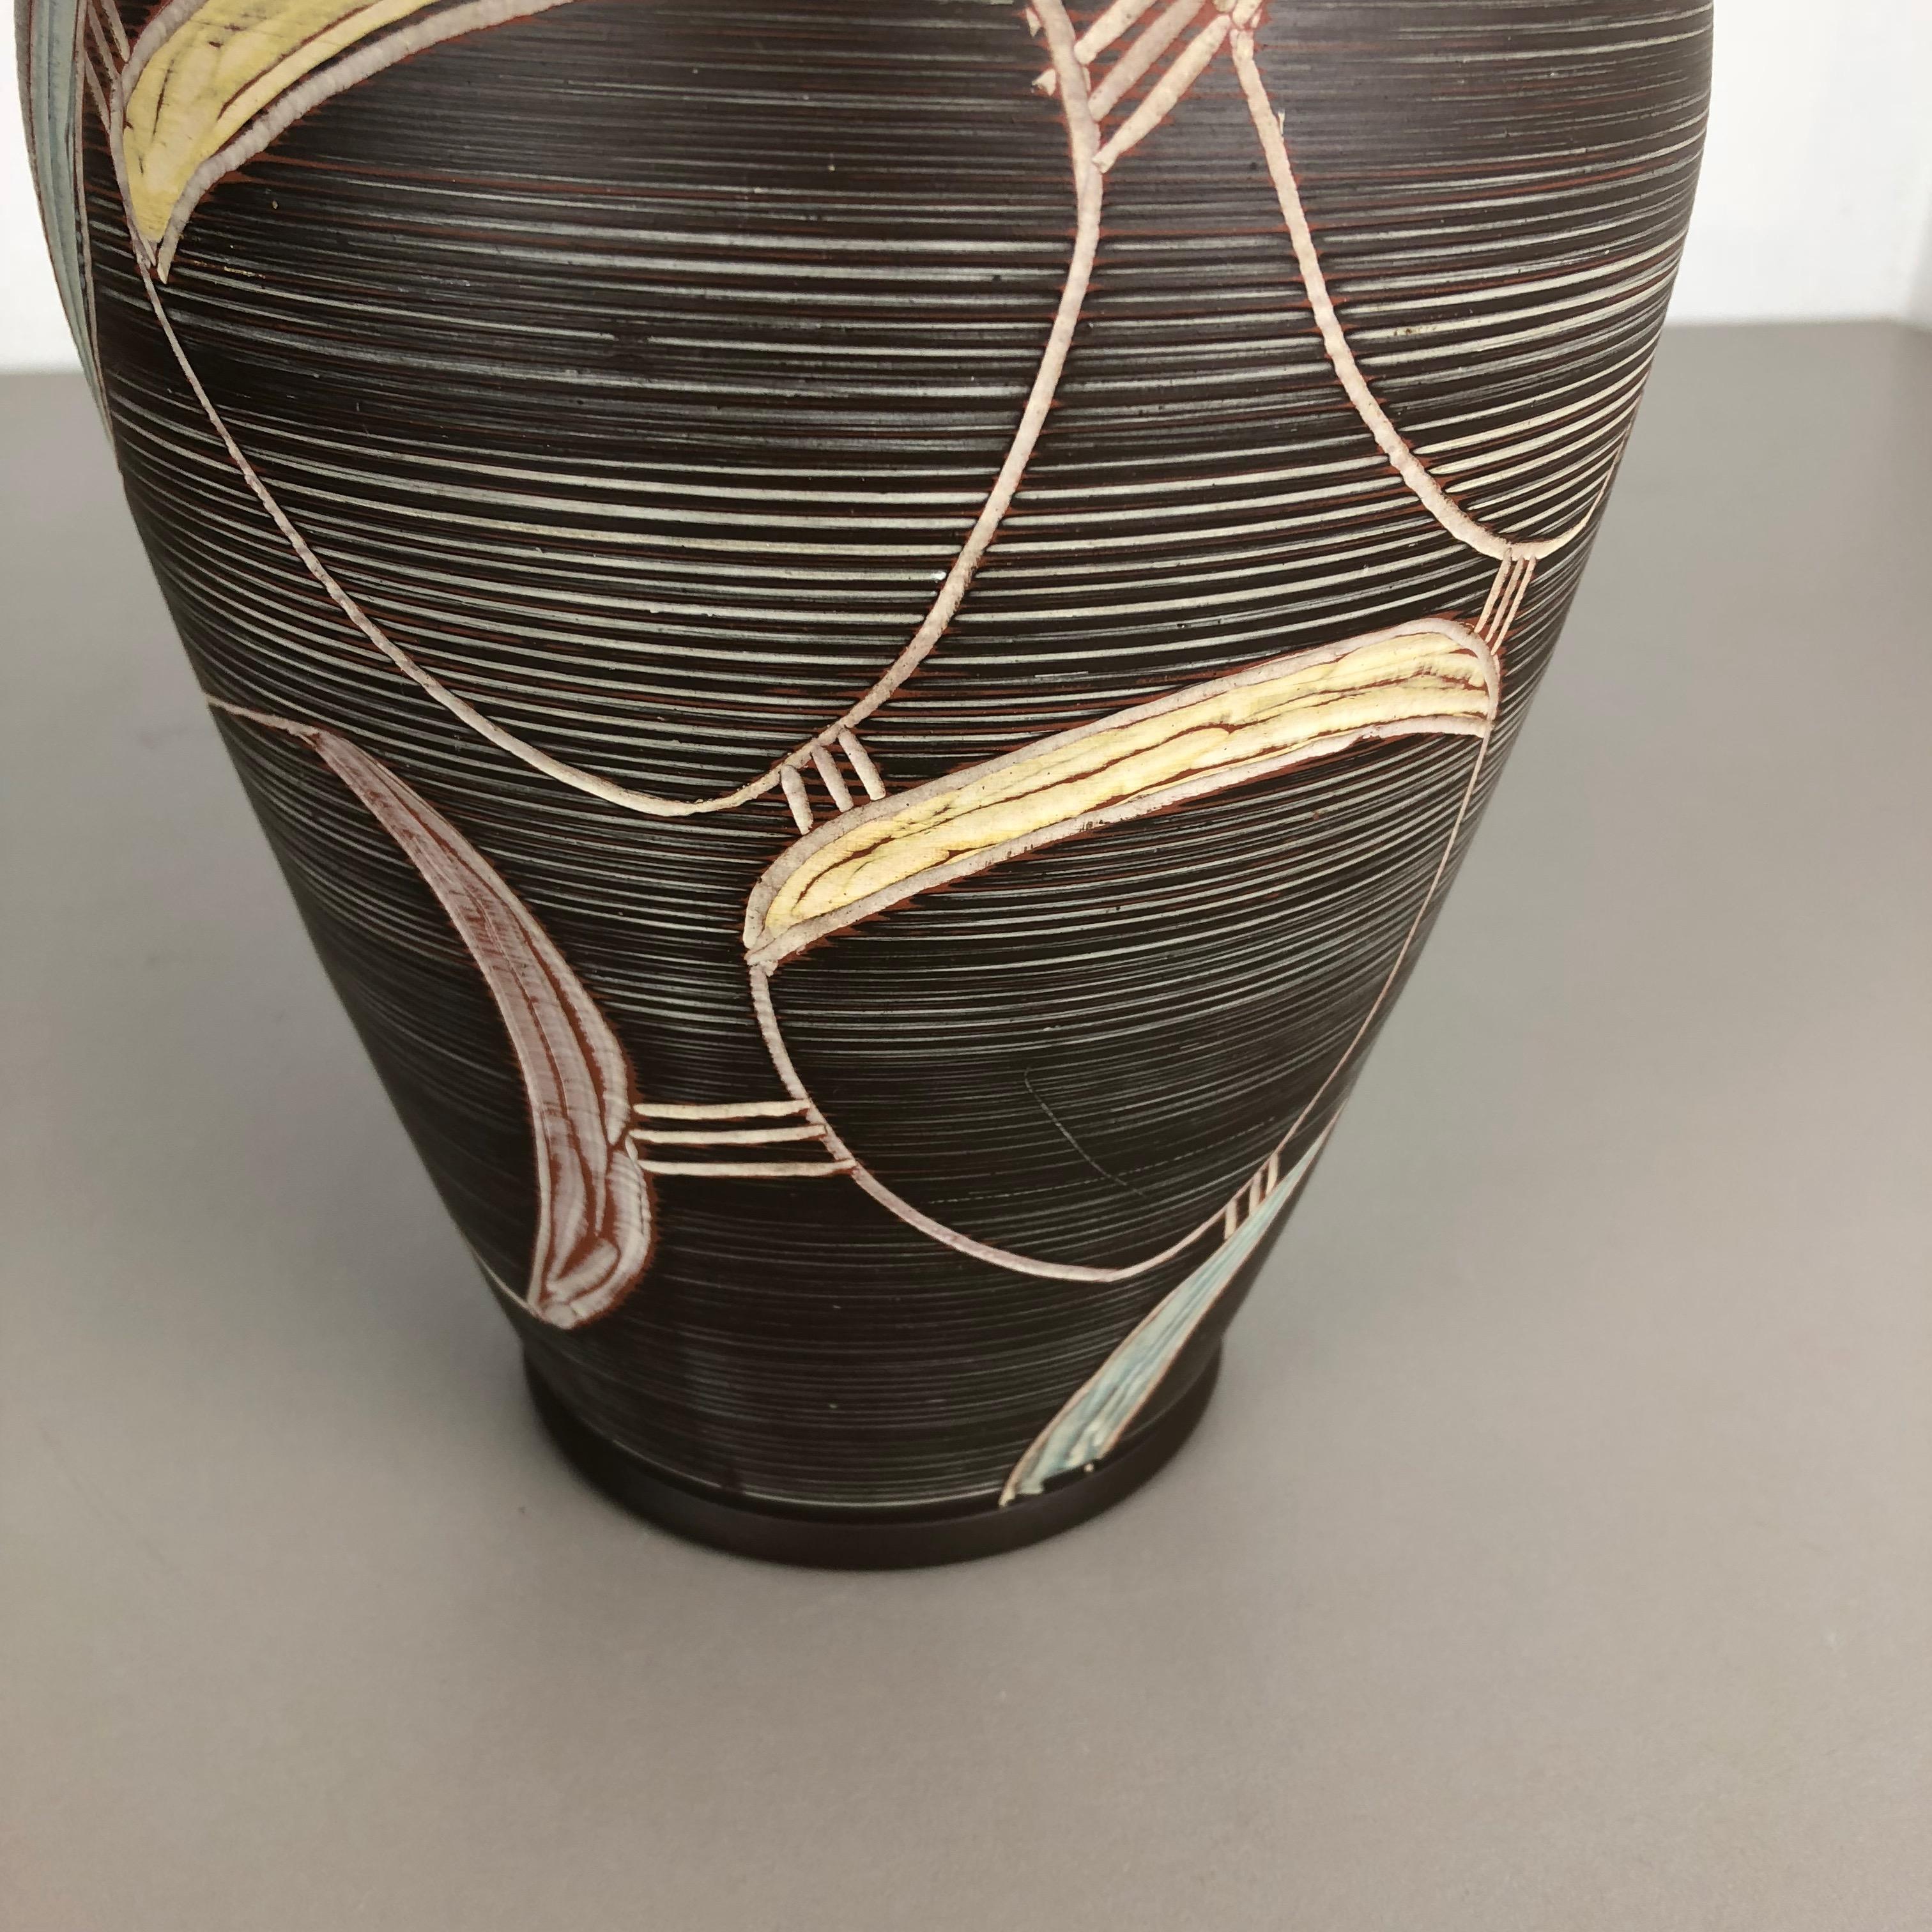 20th Century Large Abstract Ceramic Pottery Vase by Sawa Franz Schwaderlapp, Germany, 1950s